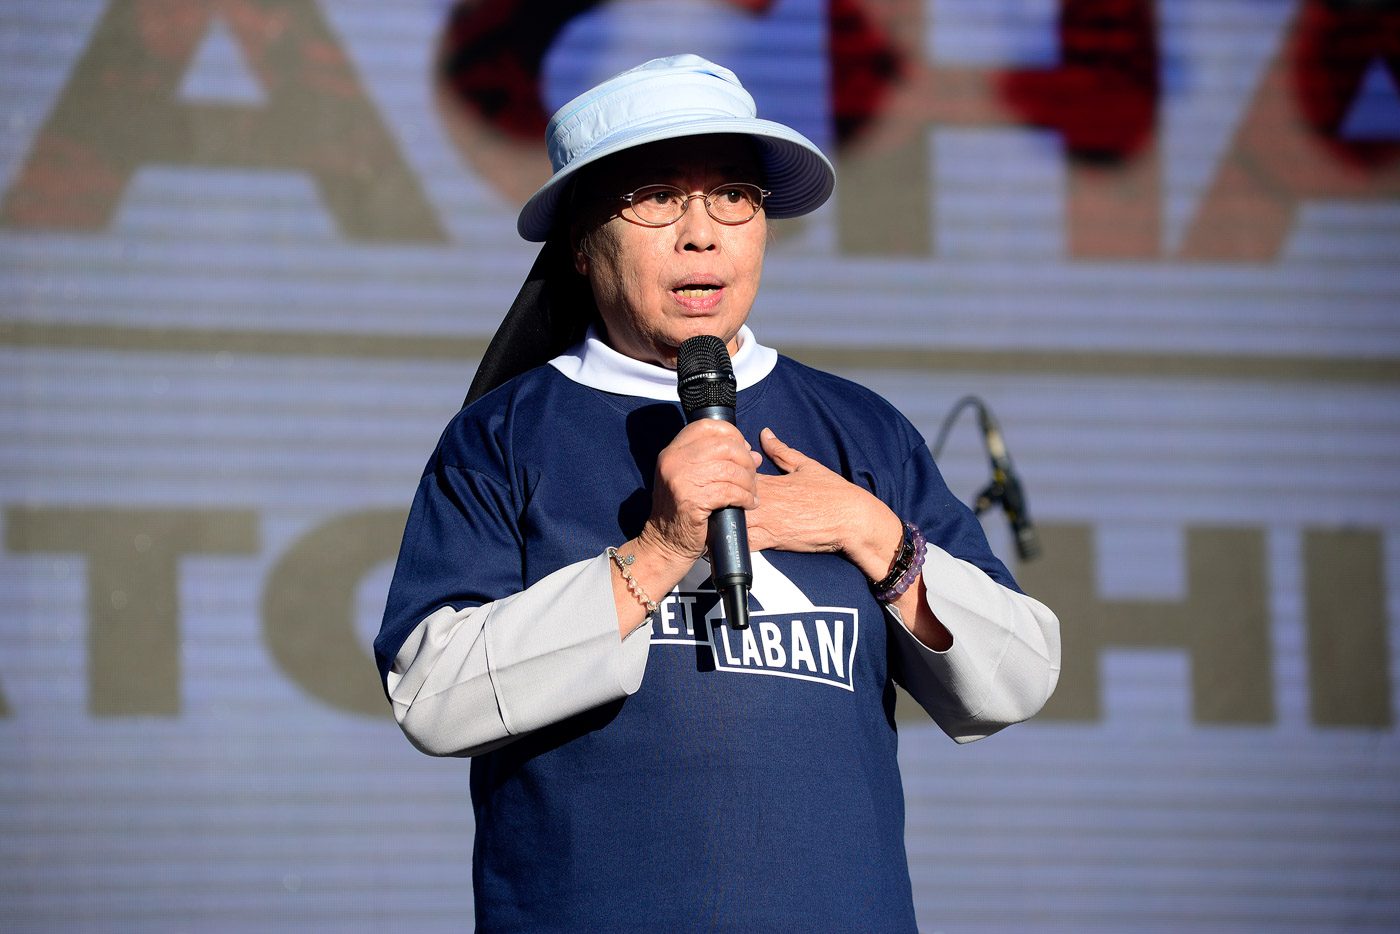 Sister Mary John Mananzan takes the stage at the rally. Photo by Maria Tan/Rappler 